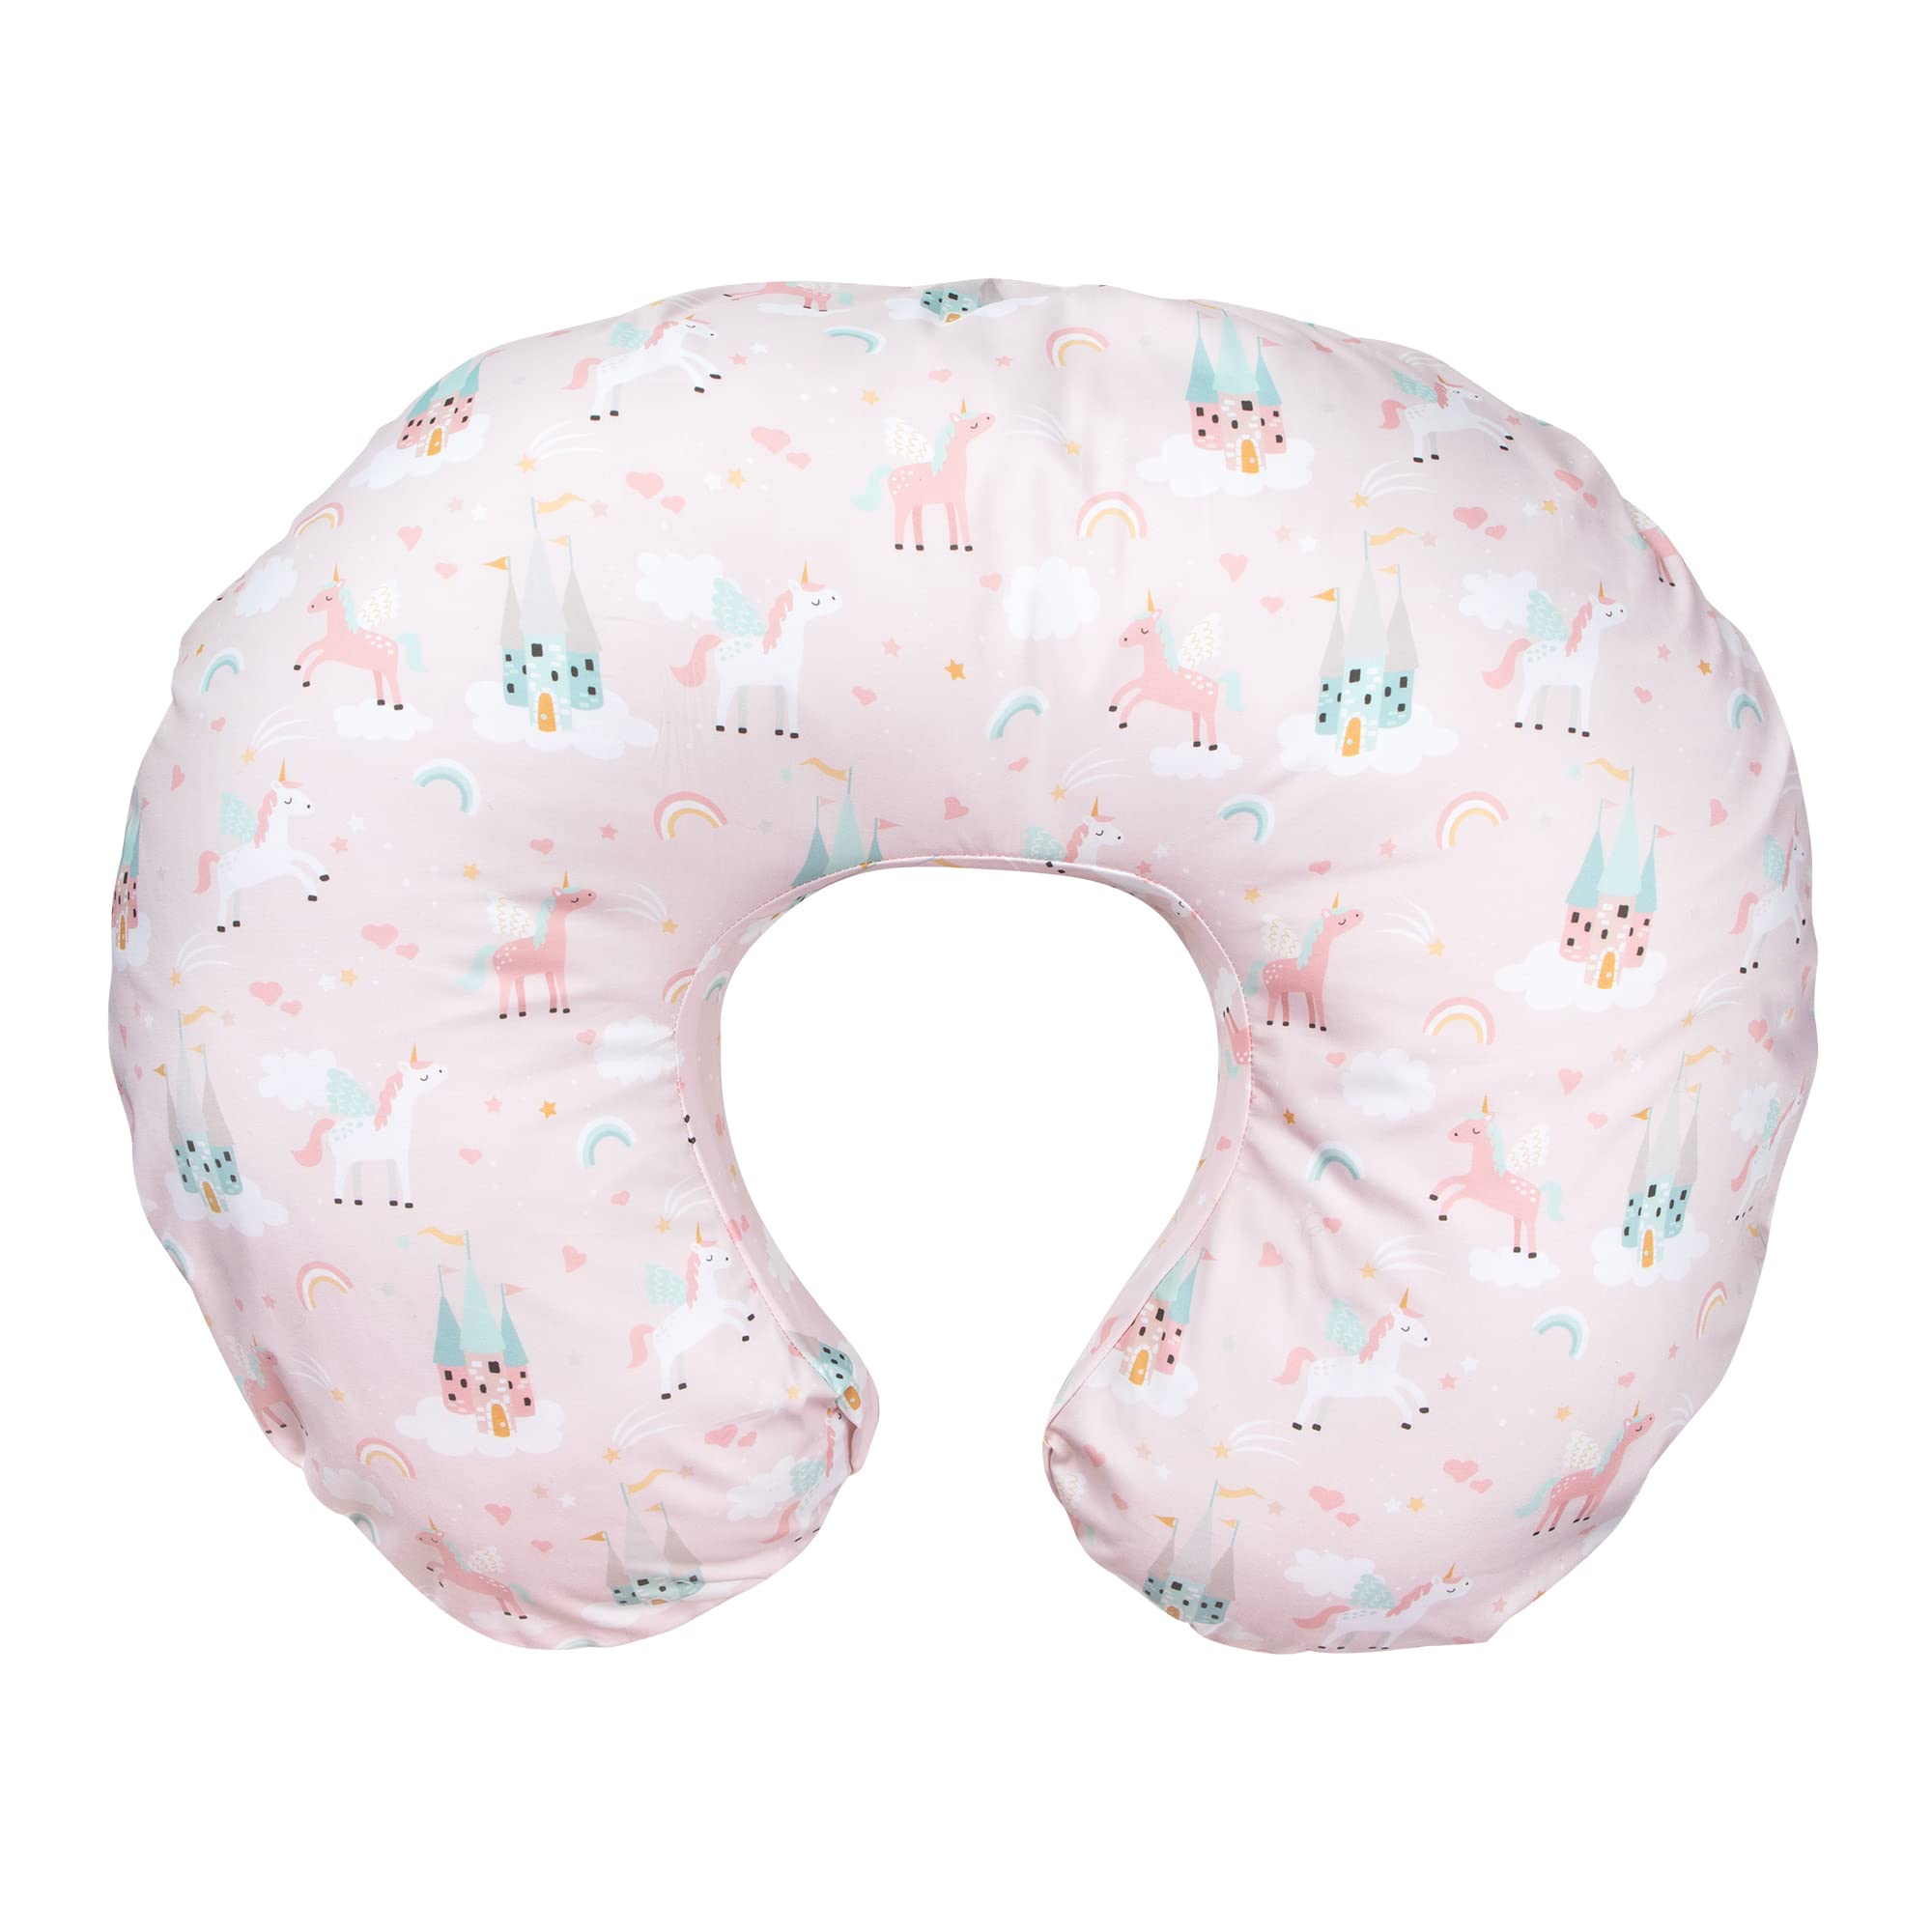 Boppy Nursing Pillow Cover—Original Pink Unicorns and Castles Cotton Blend Fabric Fits Bare Naked, Original and Luxe Breastfeeding Pillow Awake Time Only